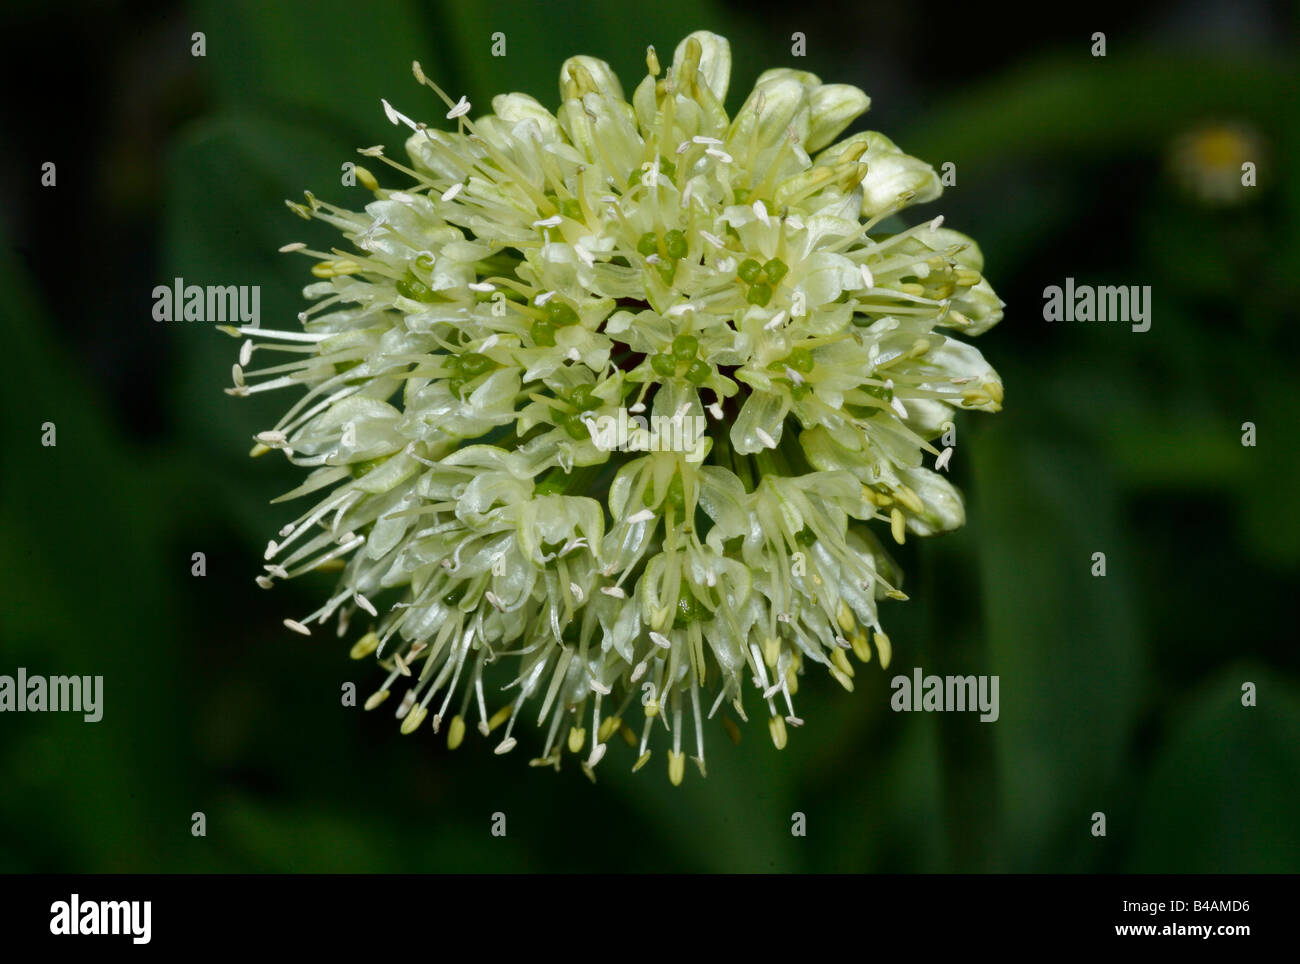 botany, onion, allium 'Gladiator' (Allium victorialis), bloom, Additional-Rights-Clearance-Info-Not-Available Stock Photo